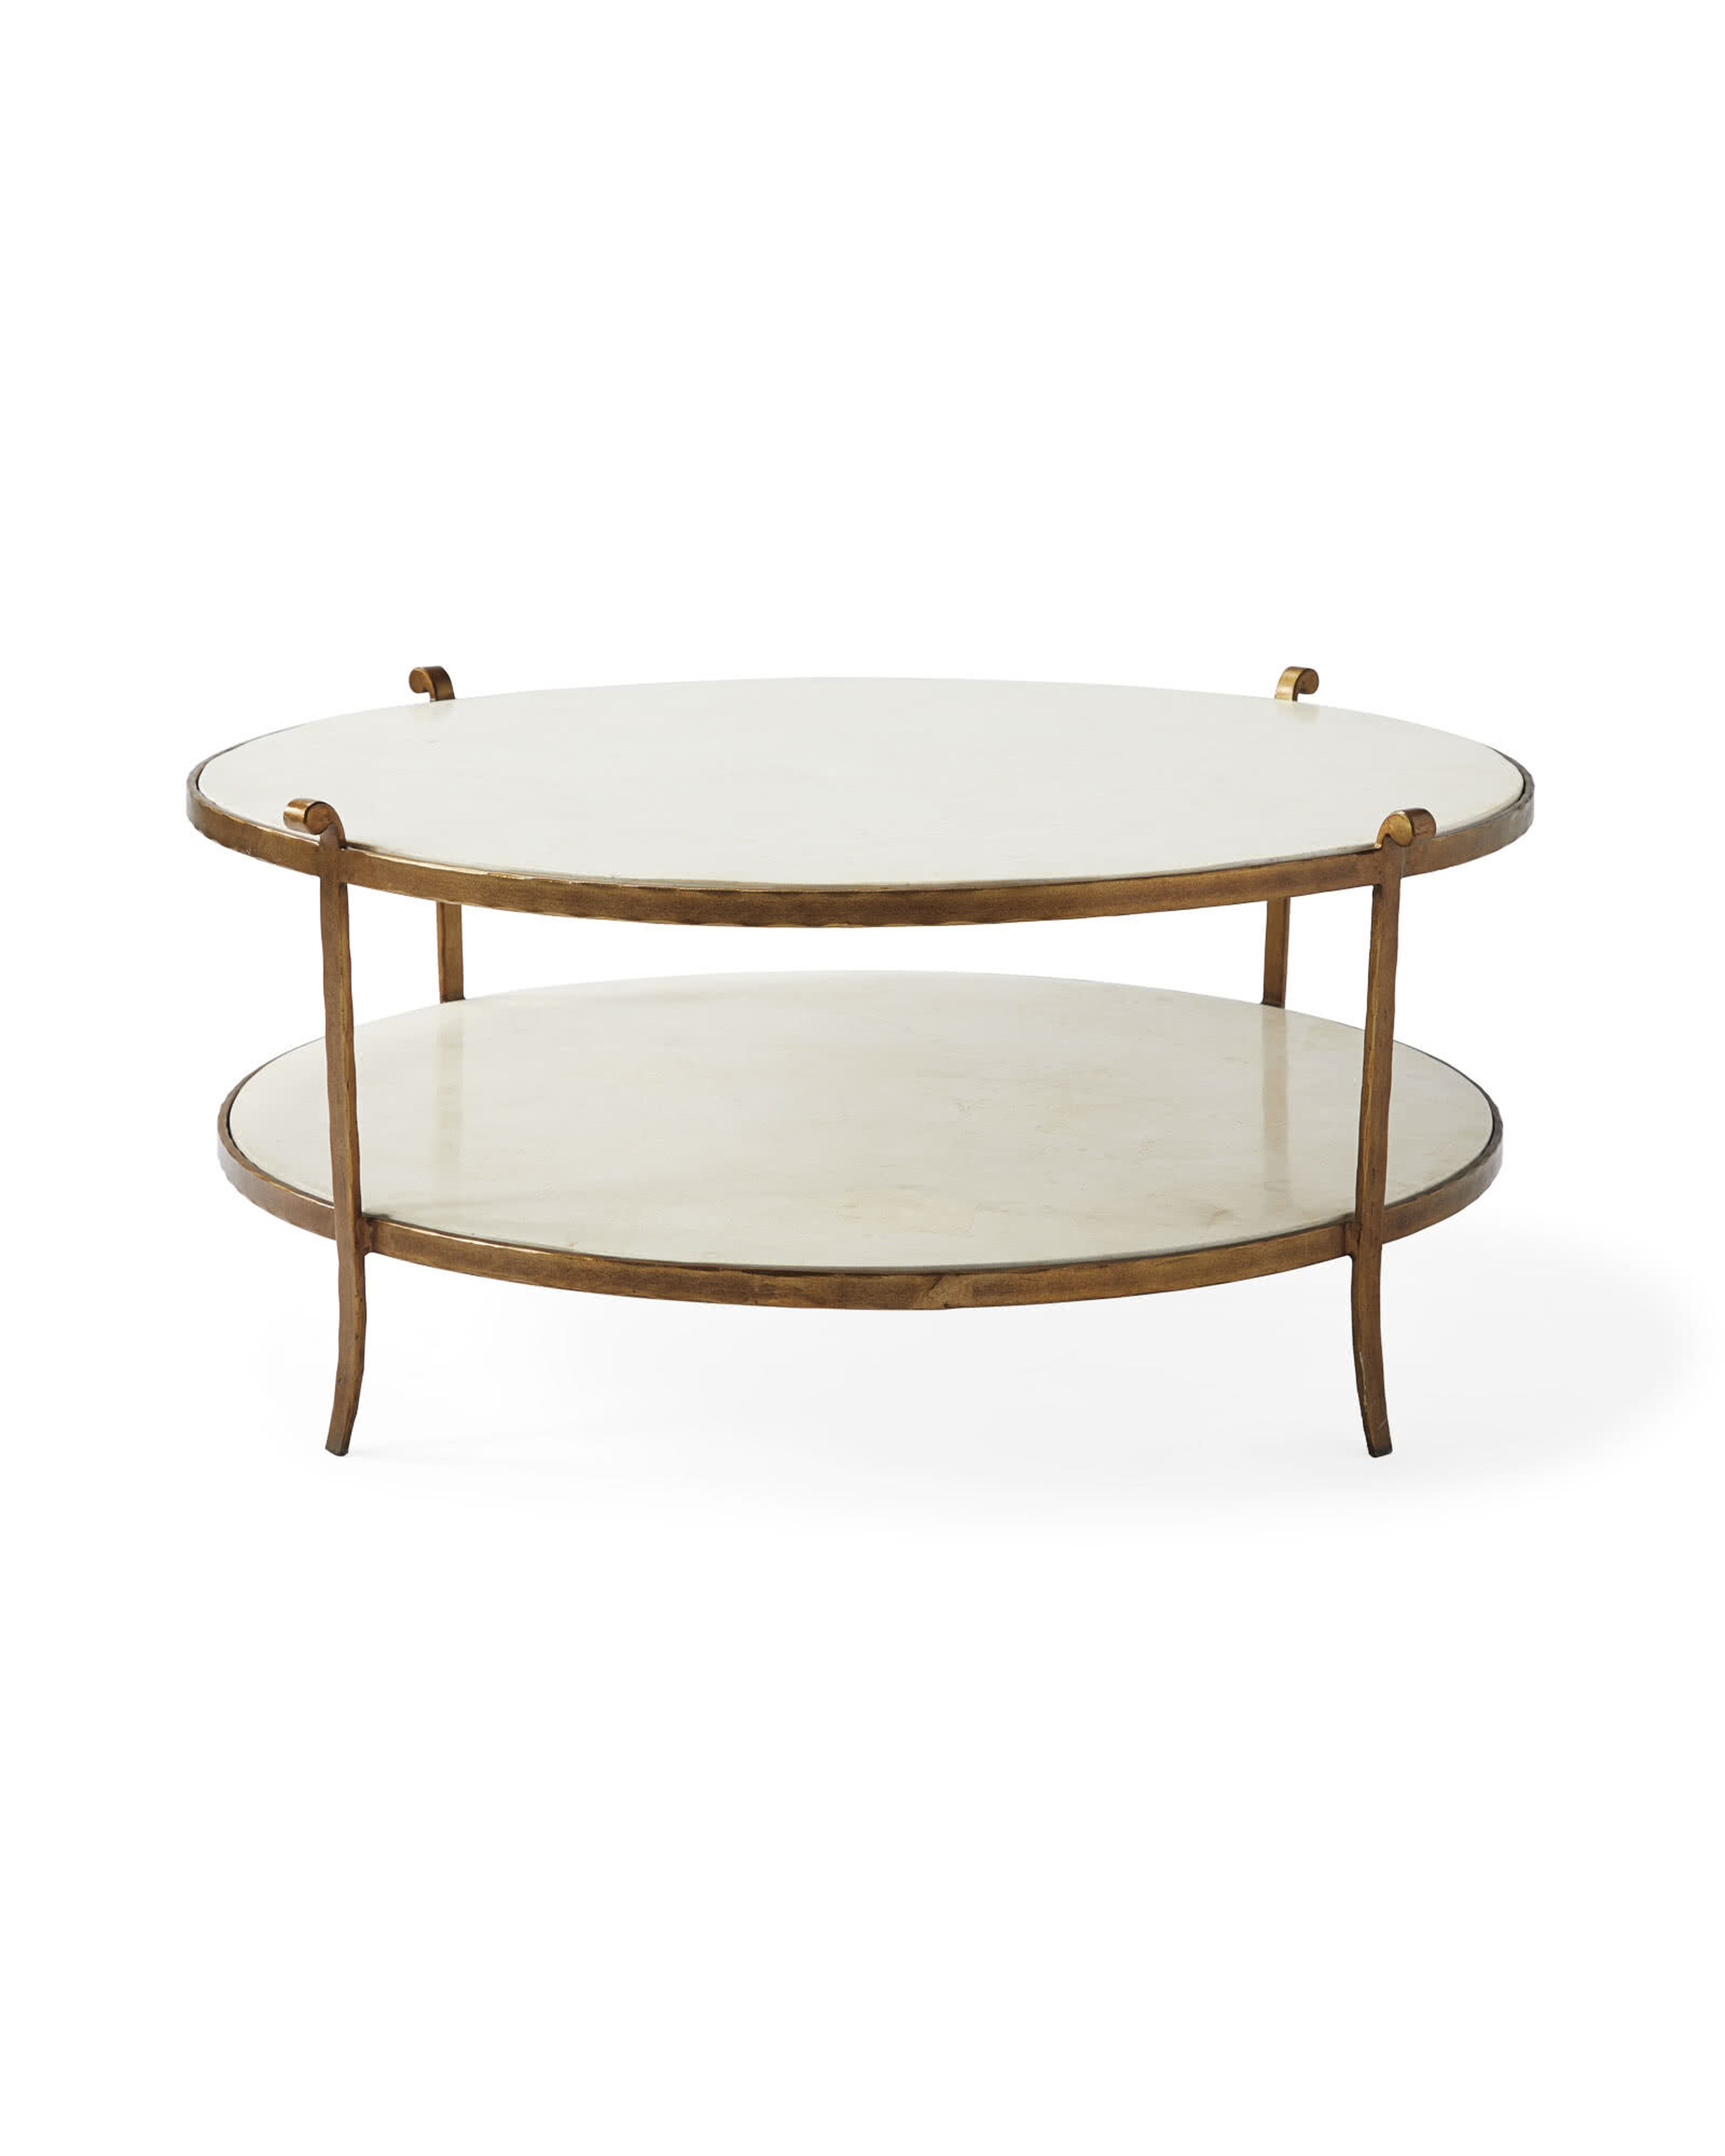 St. Germain Stone Coffee Table - Serena and Lily